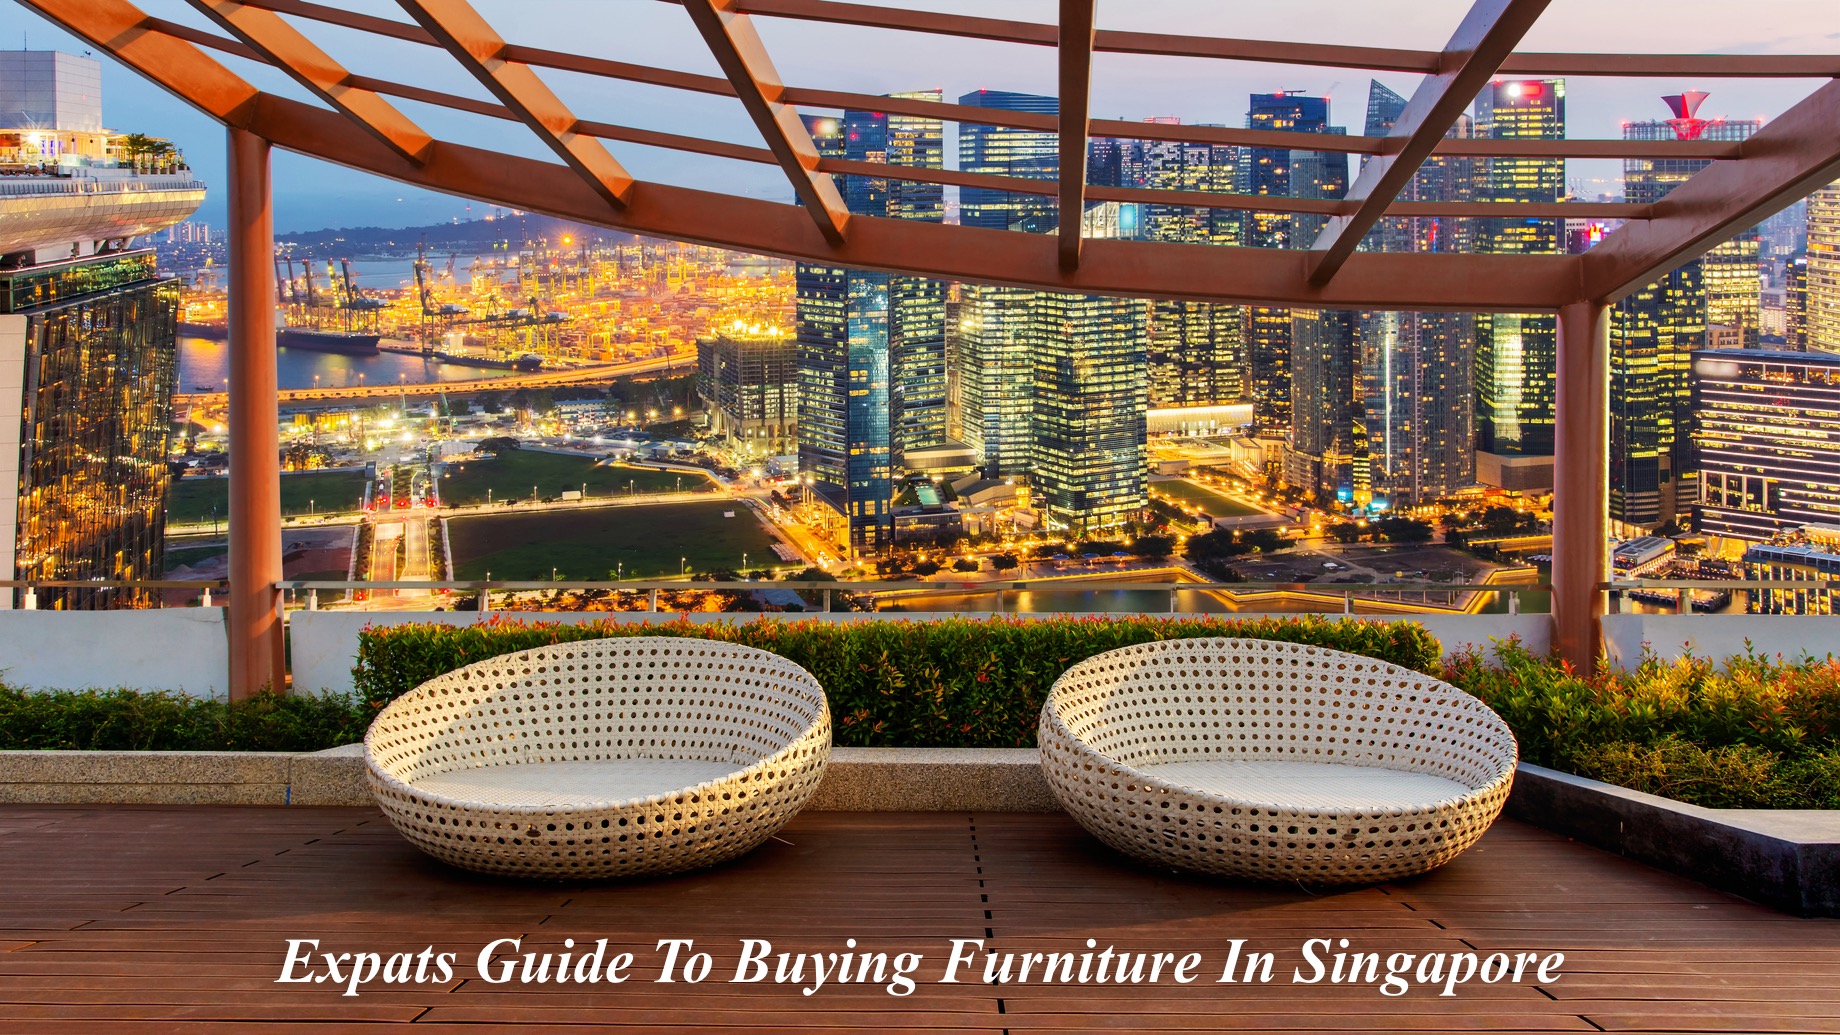 Expats Guide To Buying Furniture In Singapore